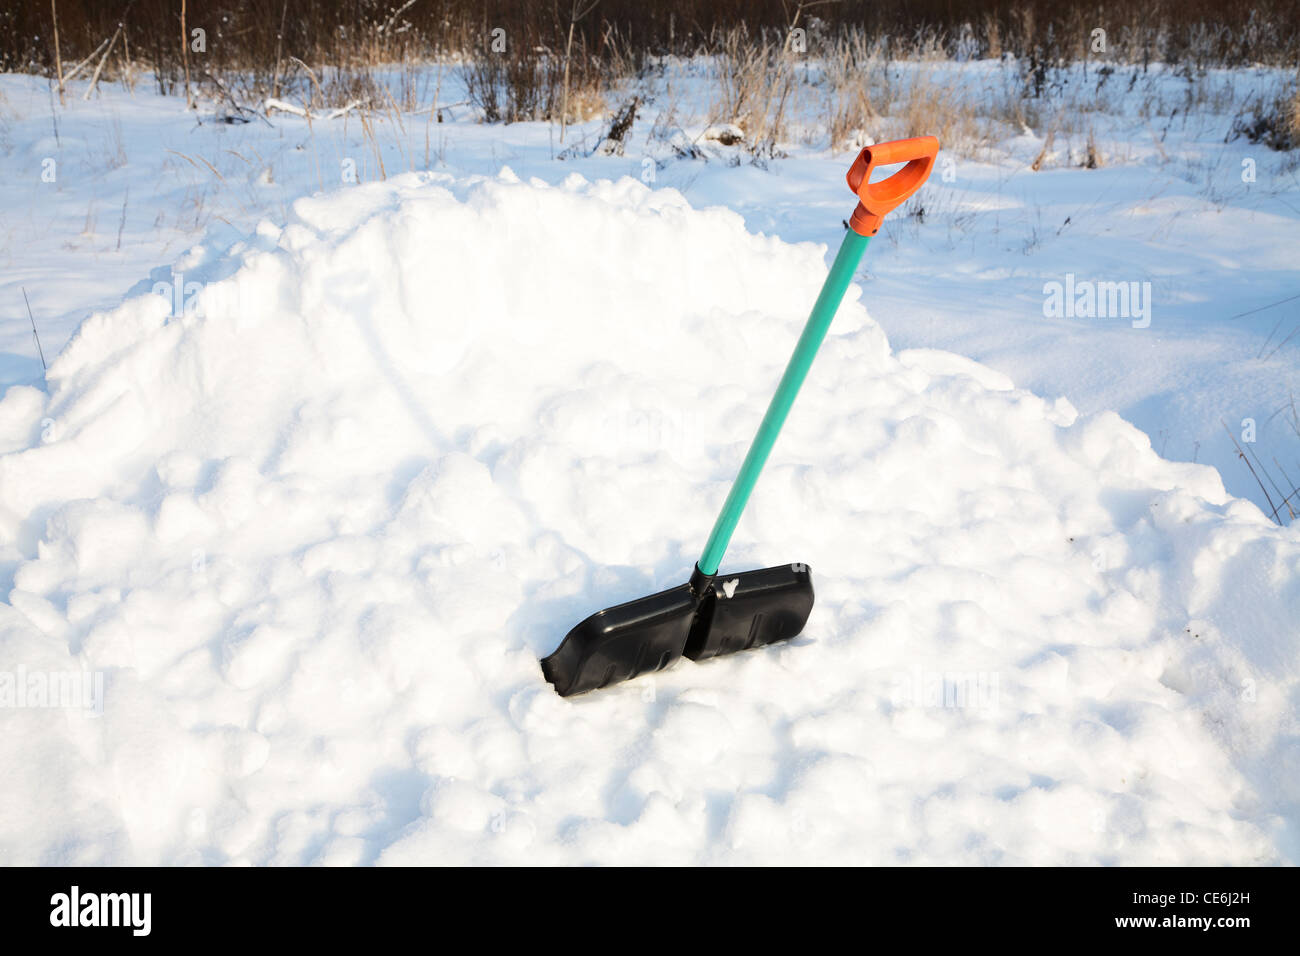 shovel for snow cleaning sticks out in a snowdrift in the winter afternoon Stock Photo